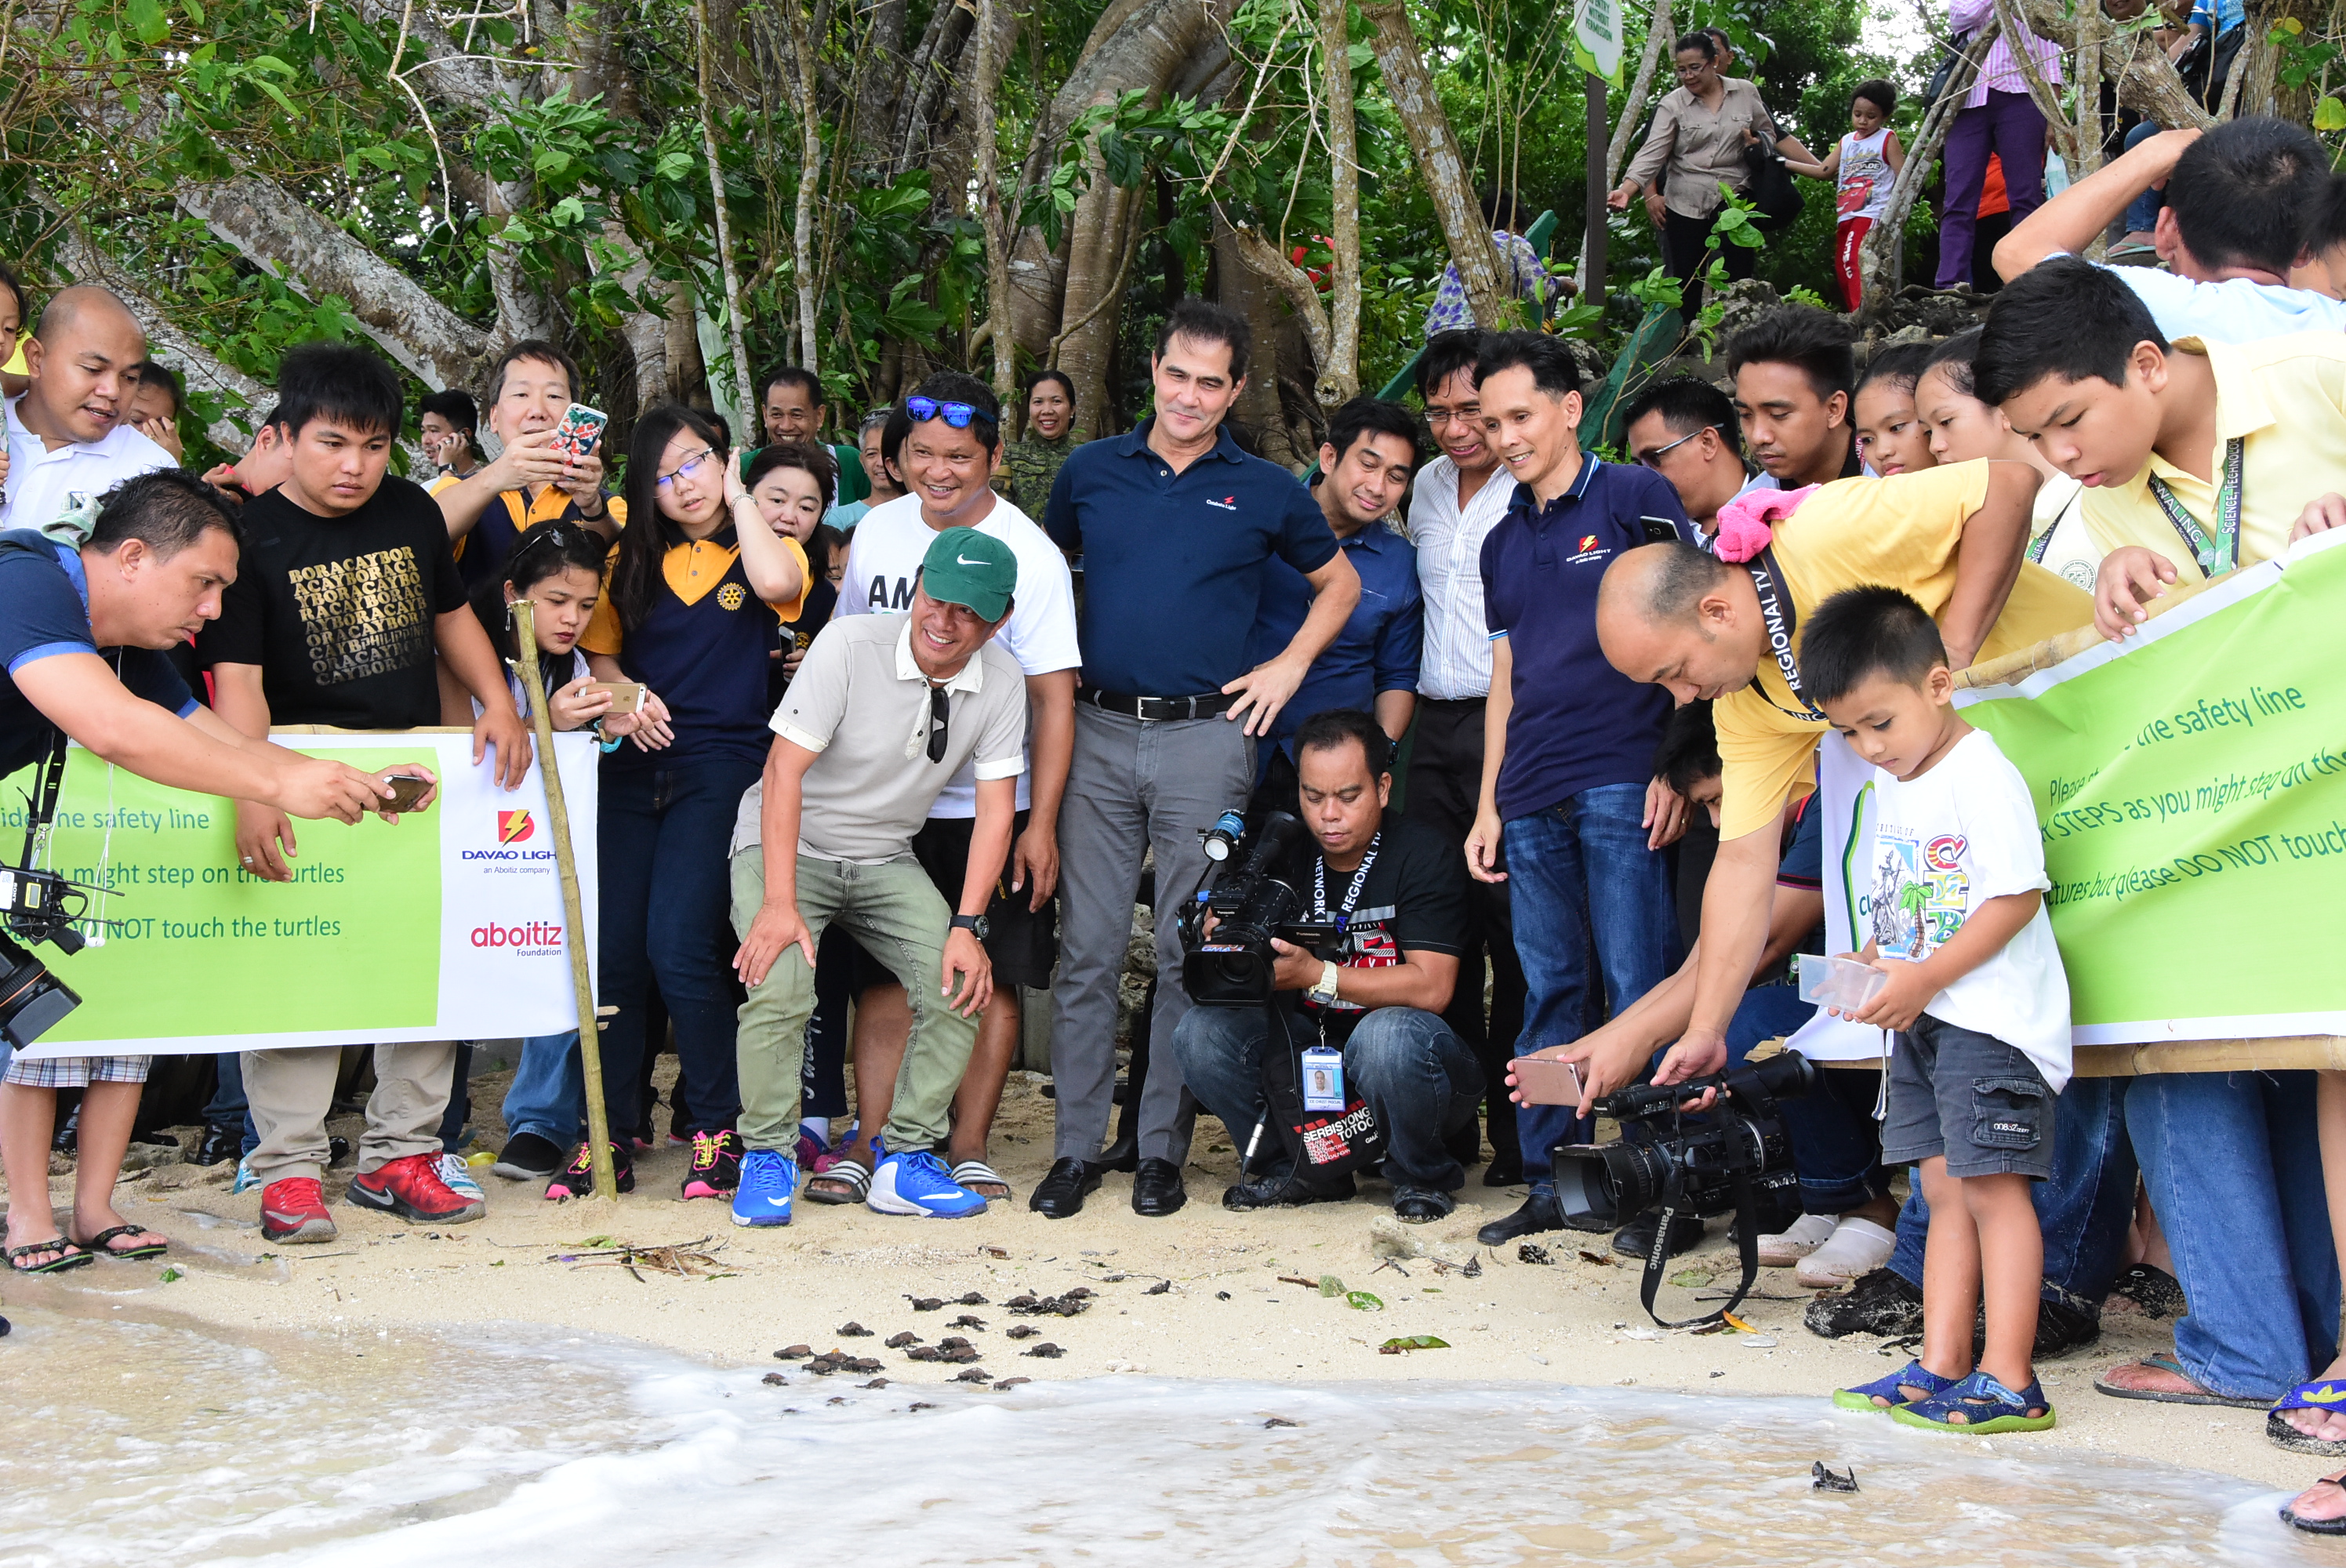 Cleanergy Park: The Release of 168 Baby Turtles To The Wild